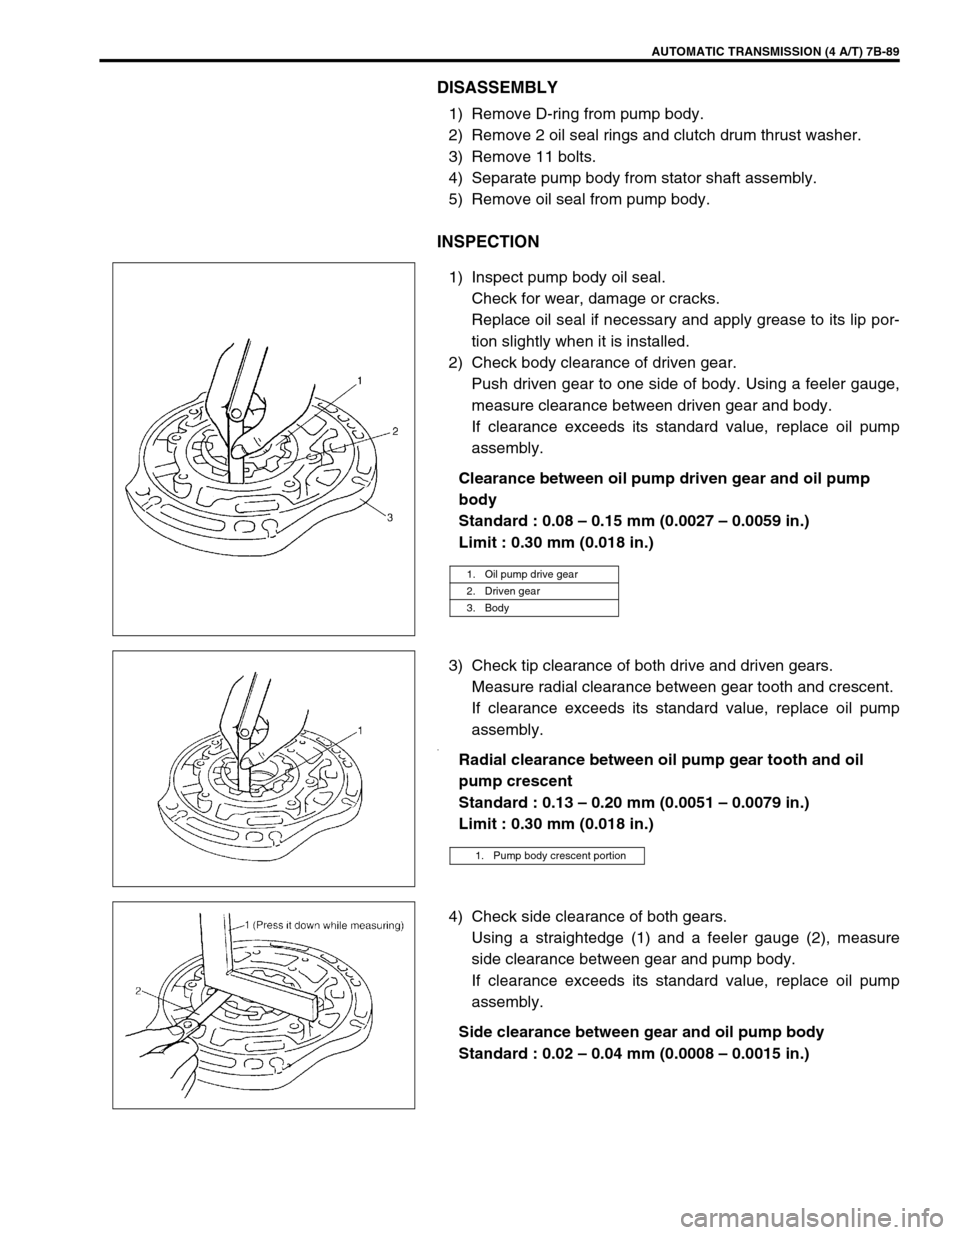 SUZUKI SWIFT 2000 1.G Transmission Service Workshop Manual AUTOMATIC TRANSMISSION (4 A/T) 7B-89
DISASSEMBLY
1) Remove D-ring from pump body.
2) Remove 2 oil seal rings and clutch drum thrust washer.
3) Remove 11 bolts.
4) Separate pump body from stator shaft 